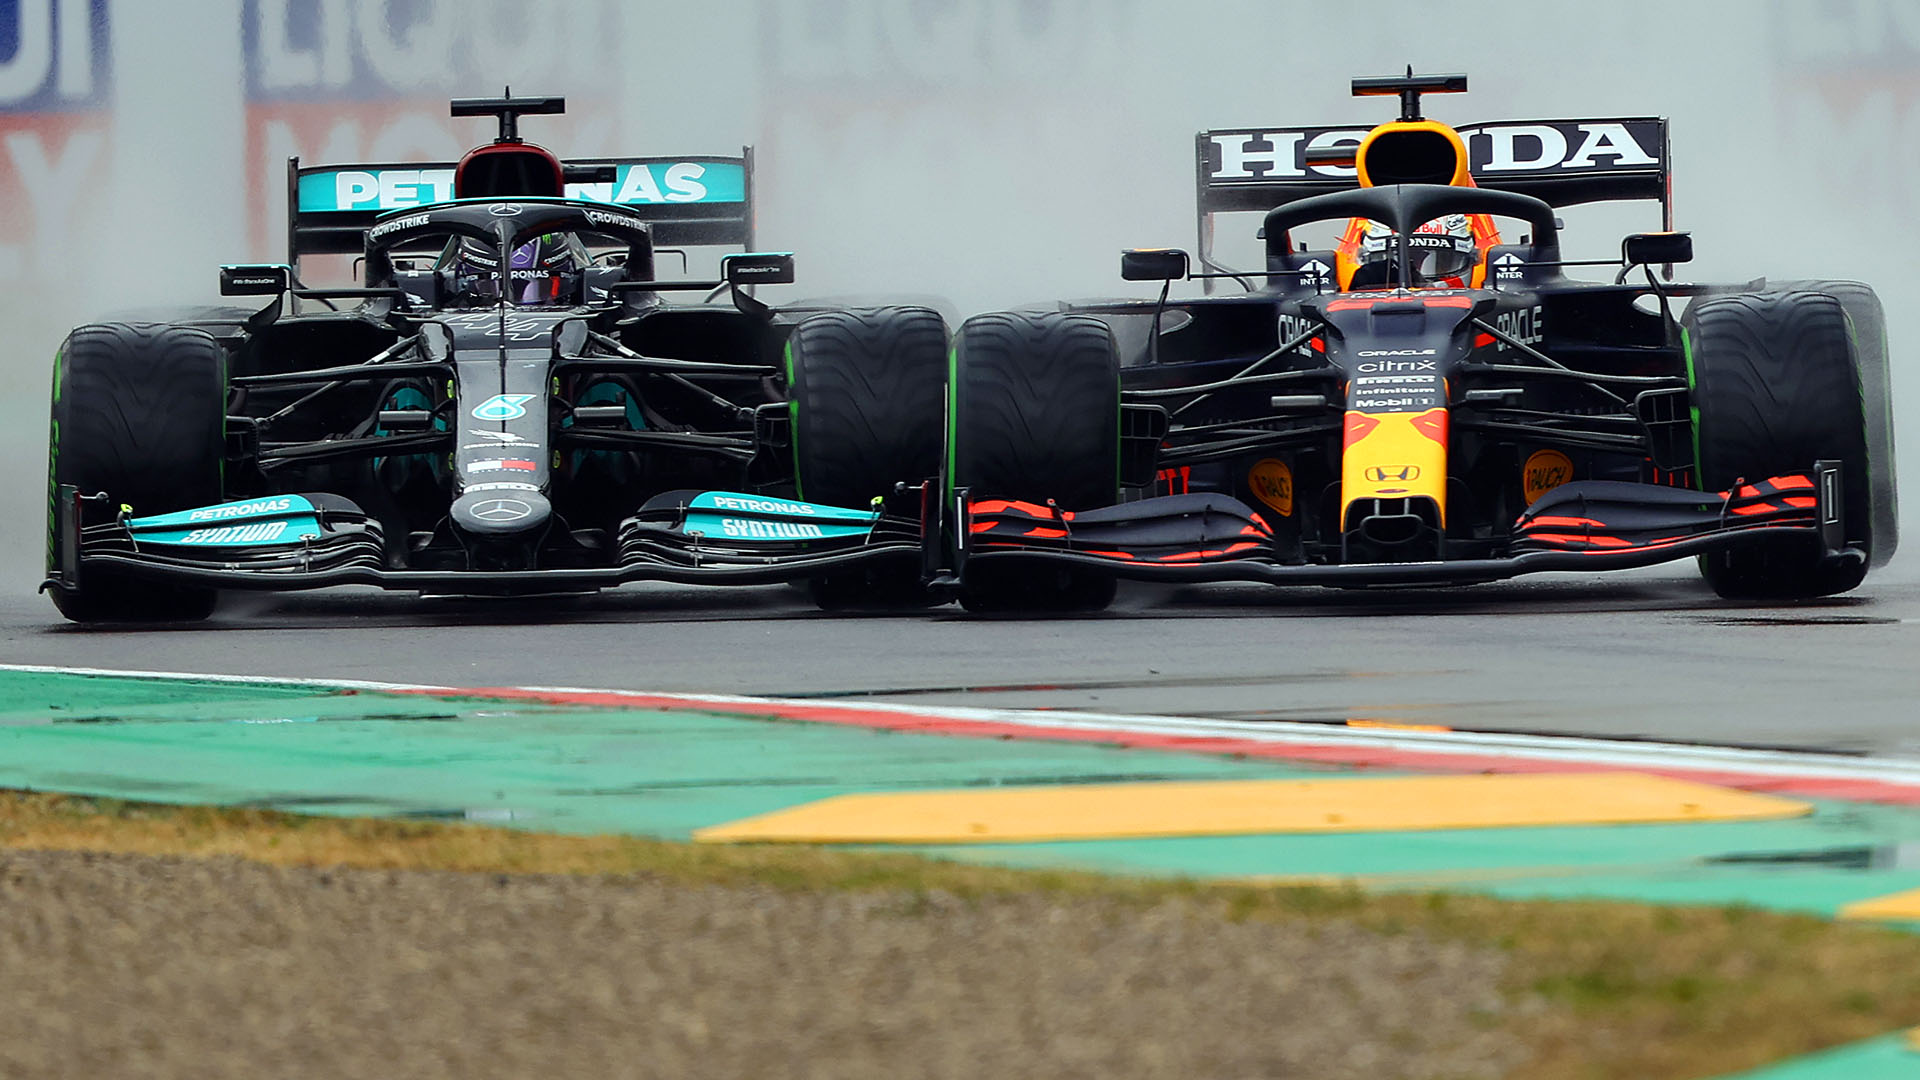 Hamilton vs Verstappen! One race to go, live to the nation The Apex